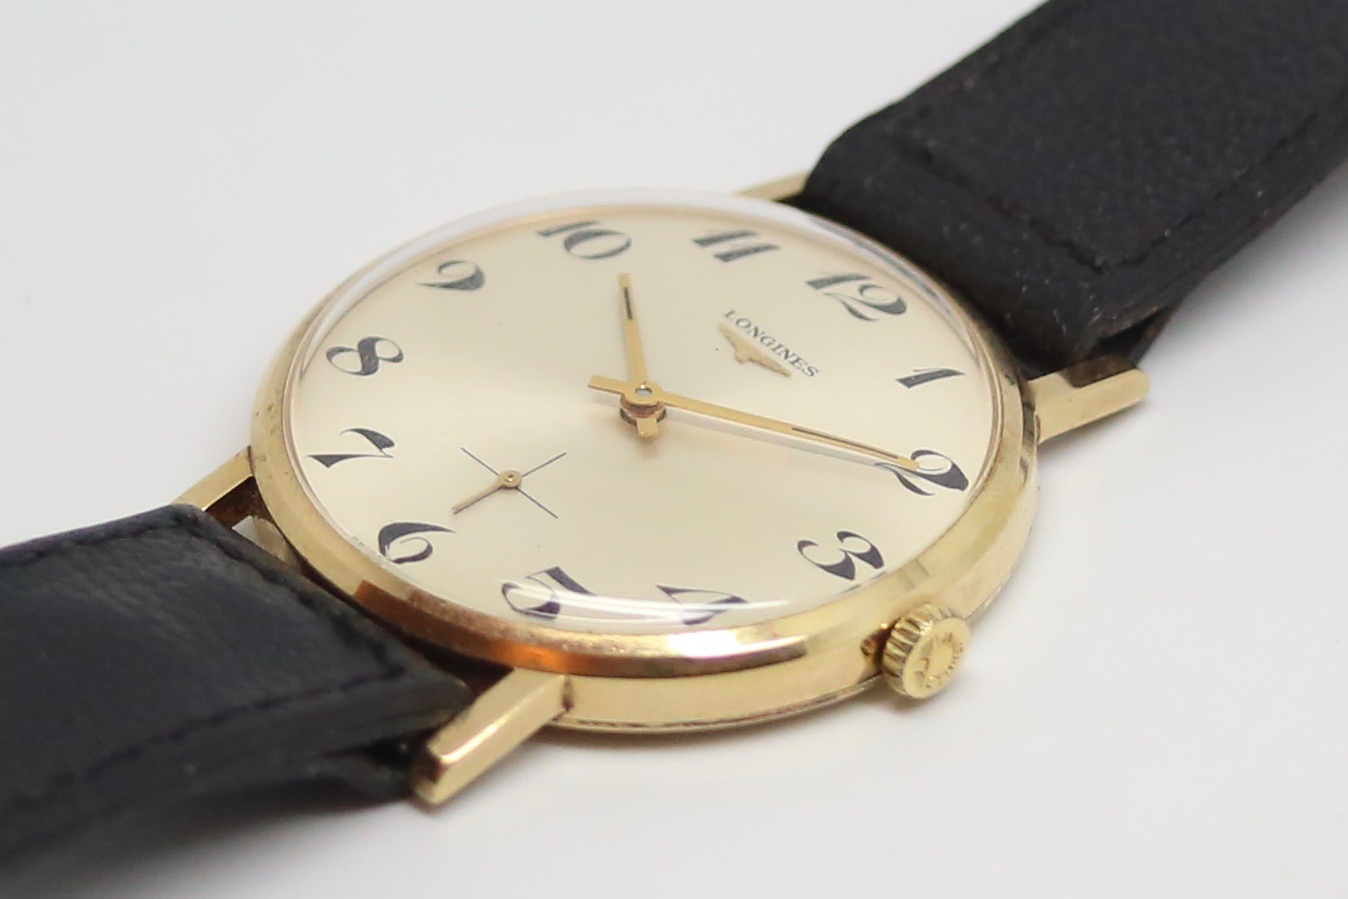 Gentleman's Longines Gold Vintage Wristwatch, circular dial with interesting arabic numerals with - Image 4 of 4